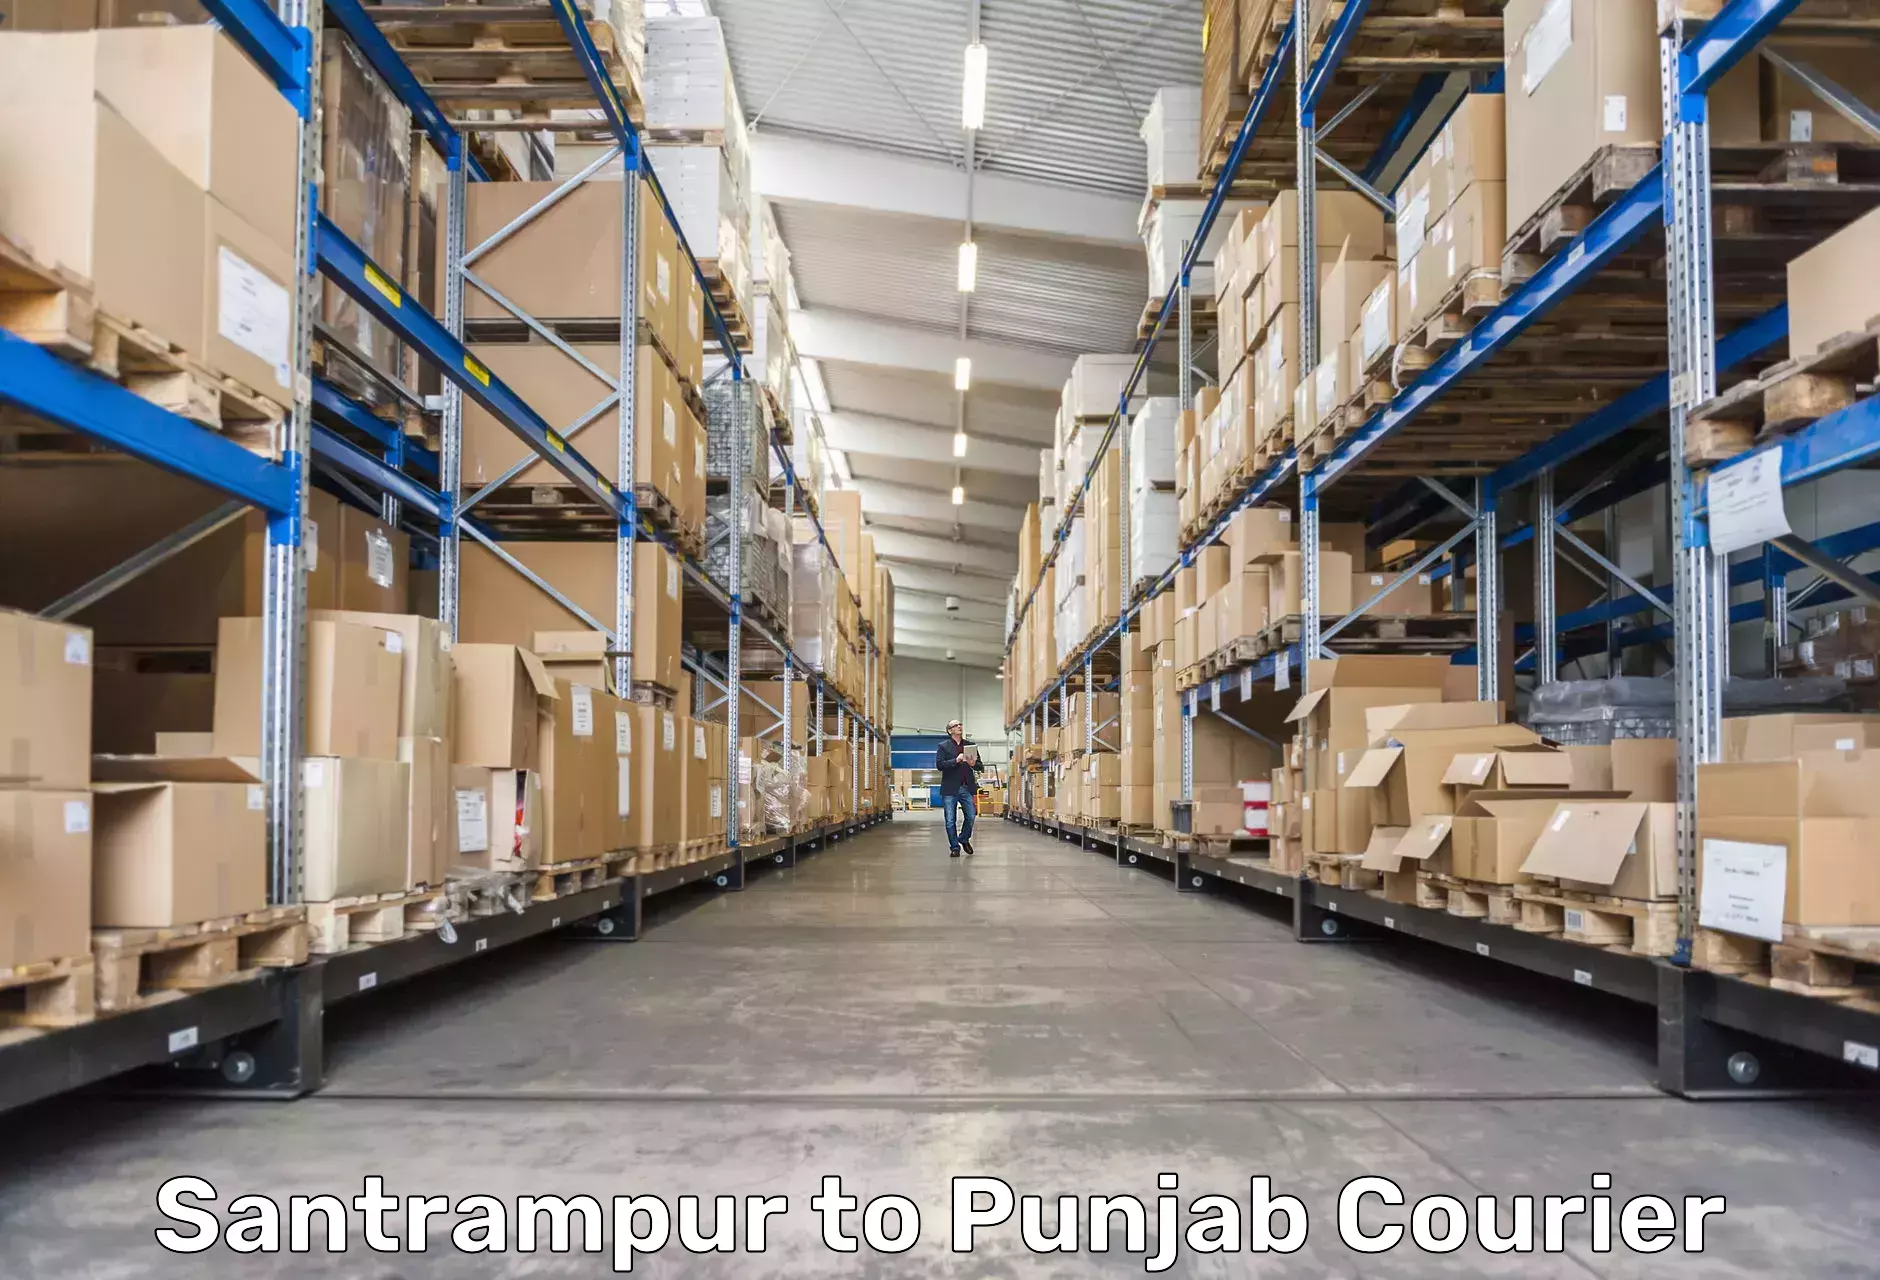 Same-day delivery solutions Santrampur to Punjab